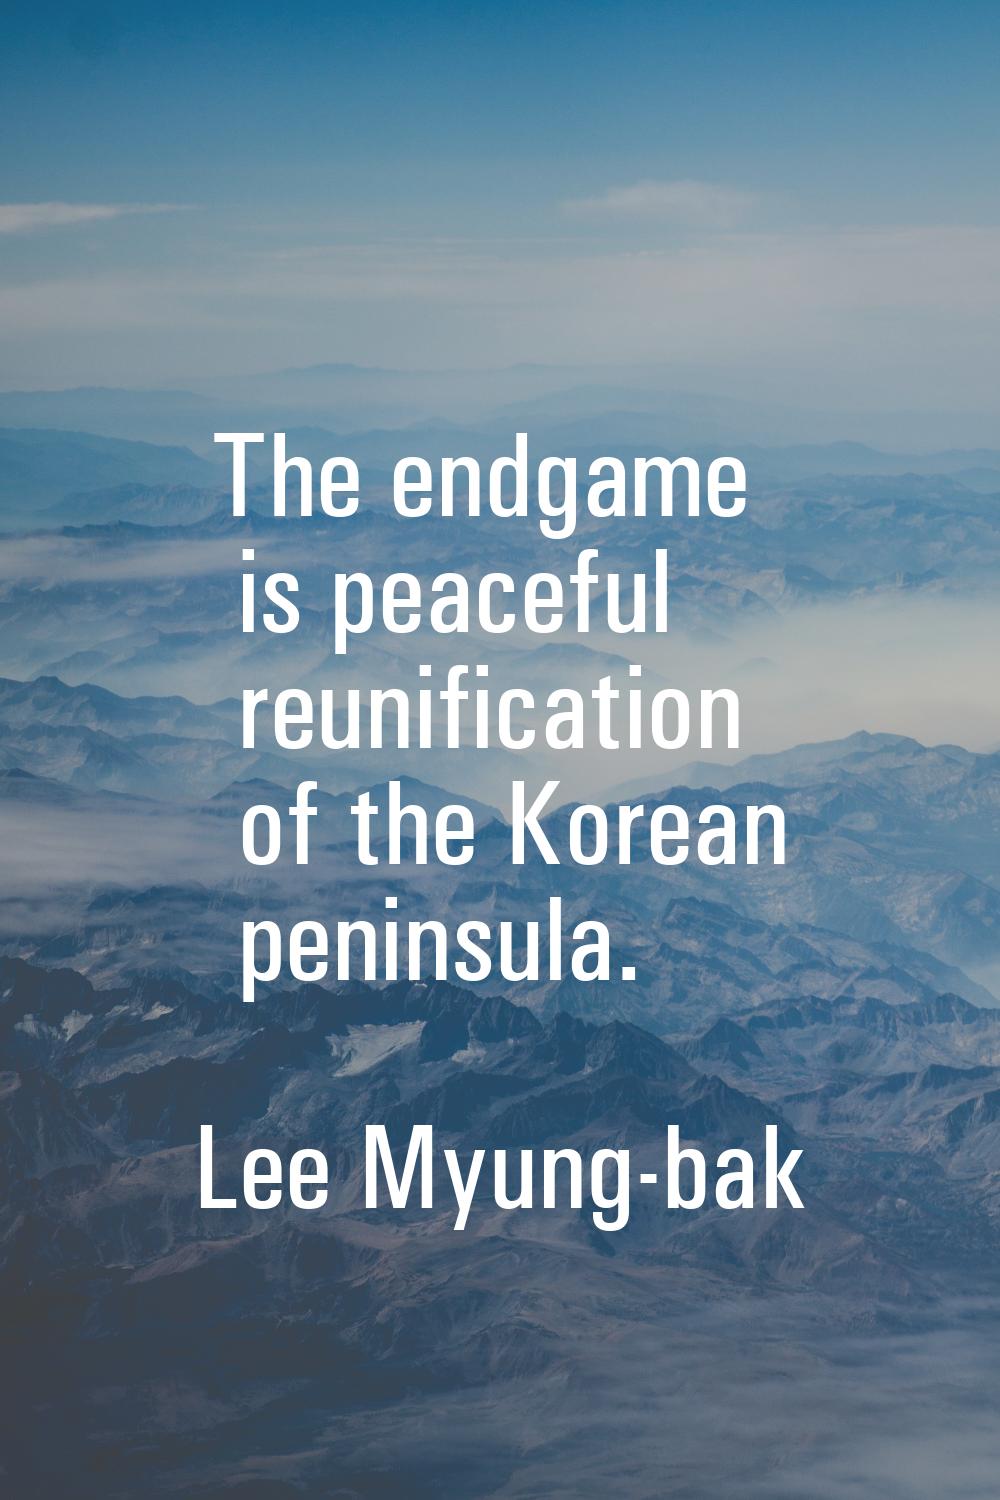 The endgame is peaceful reunification of the Korean peninsula.